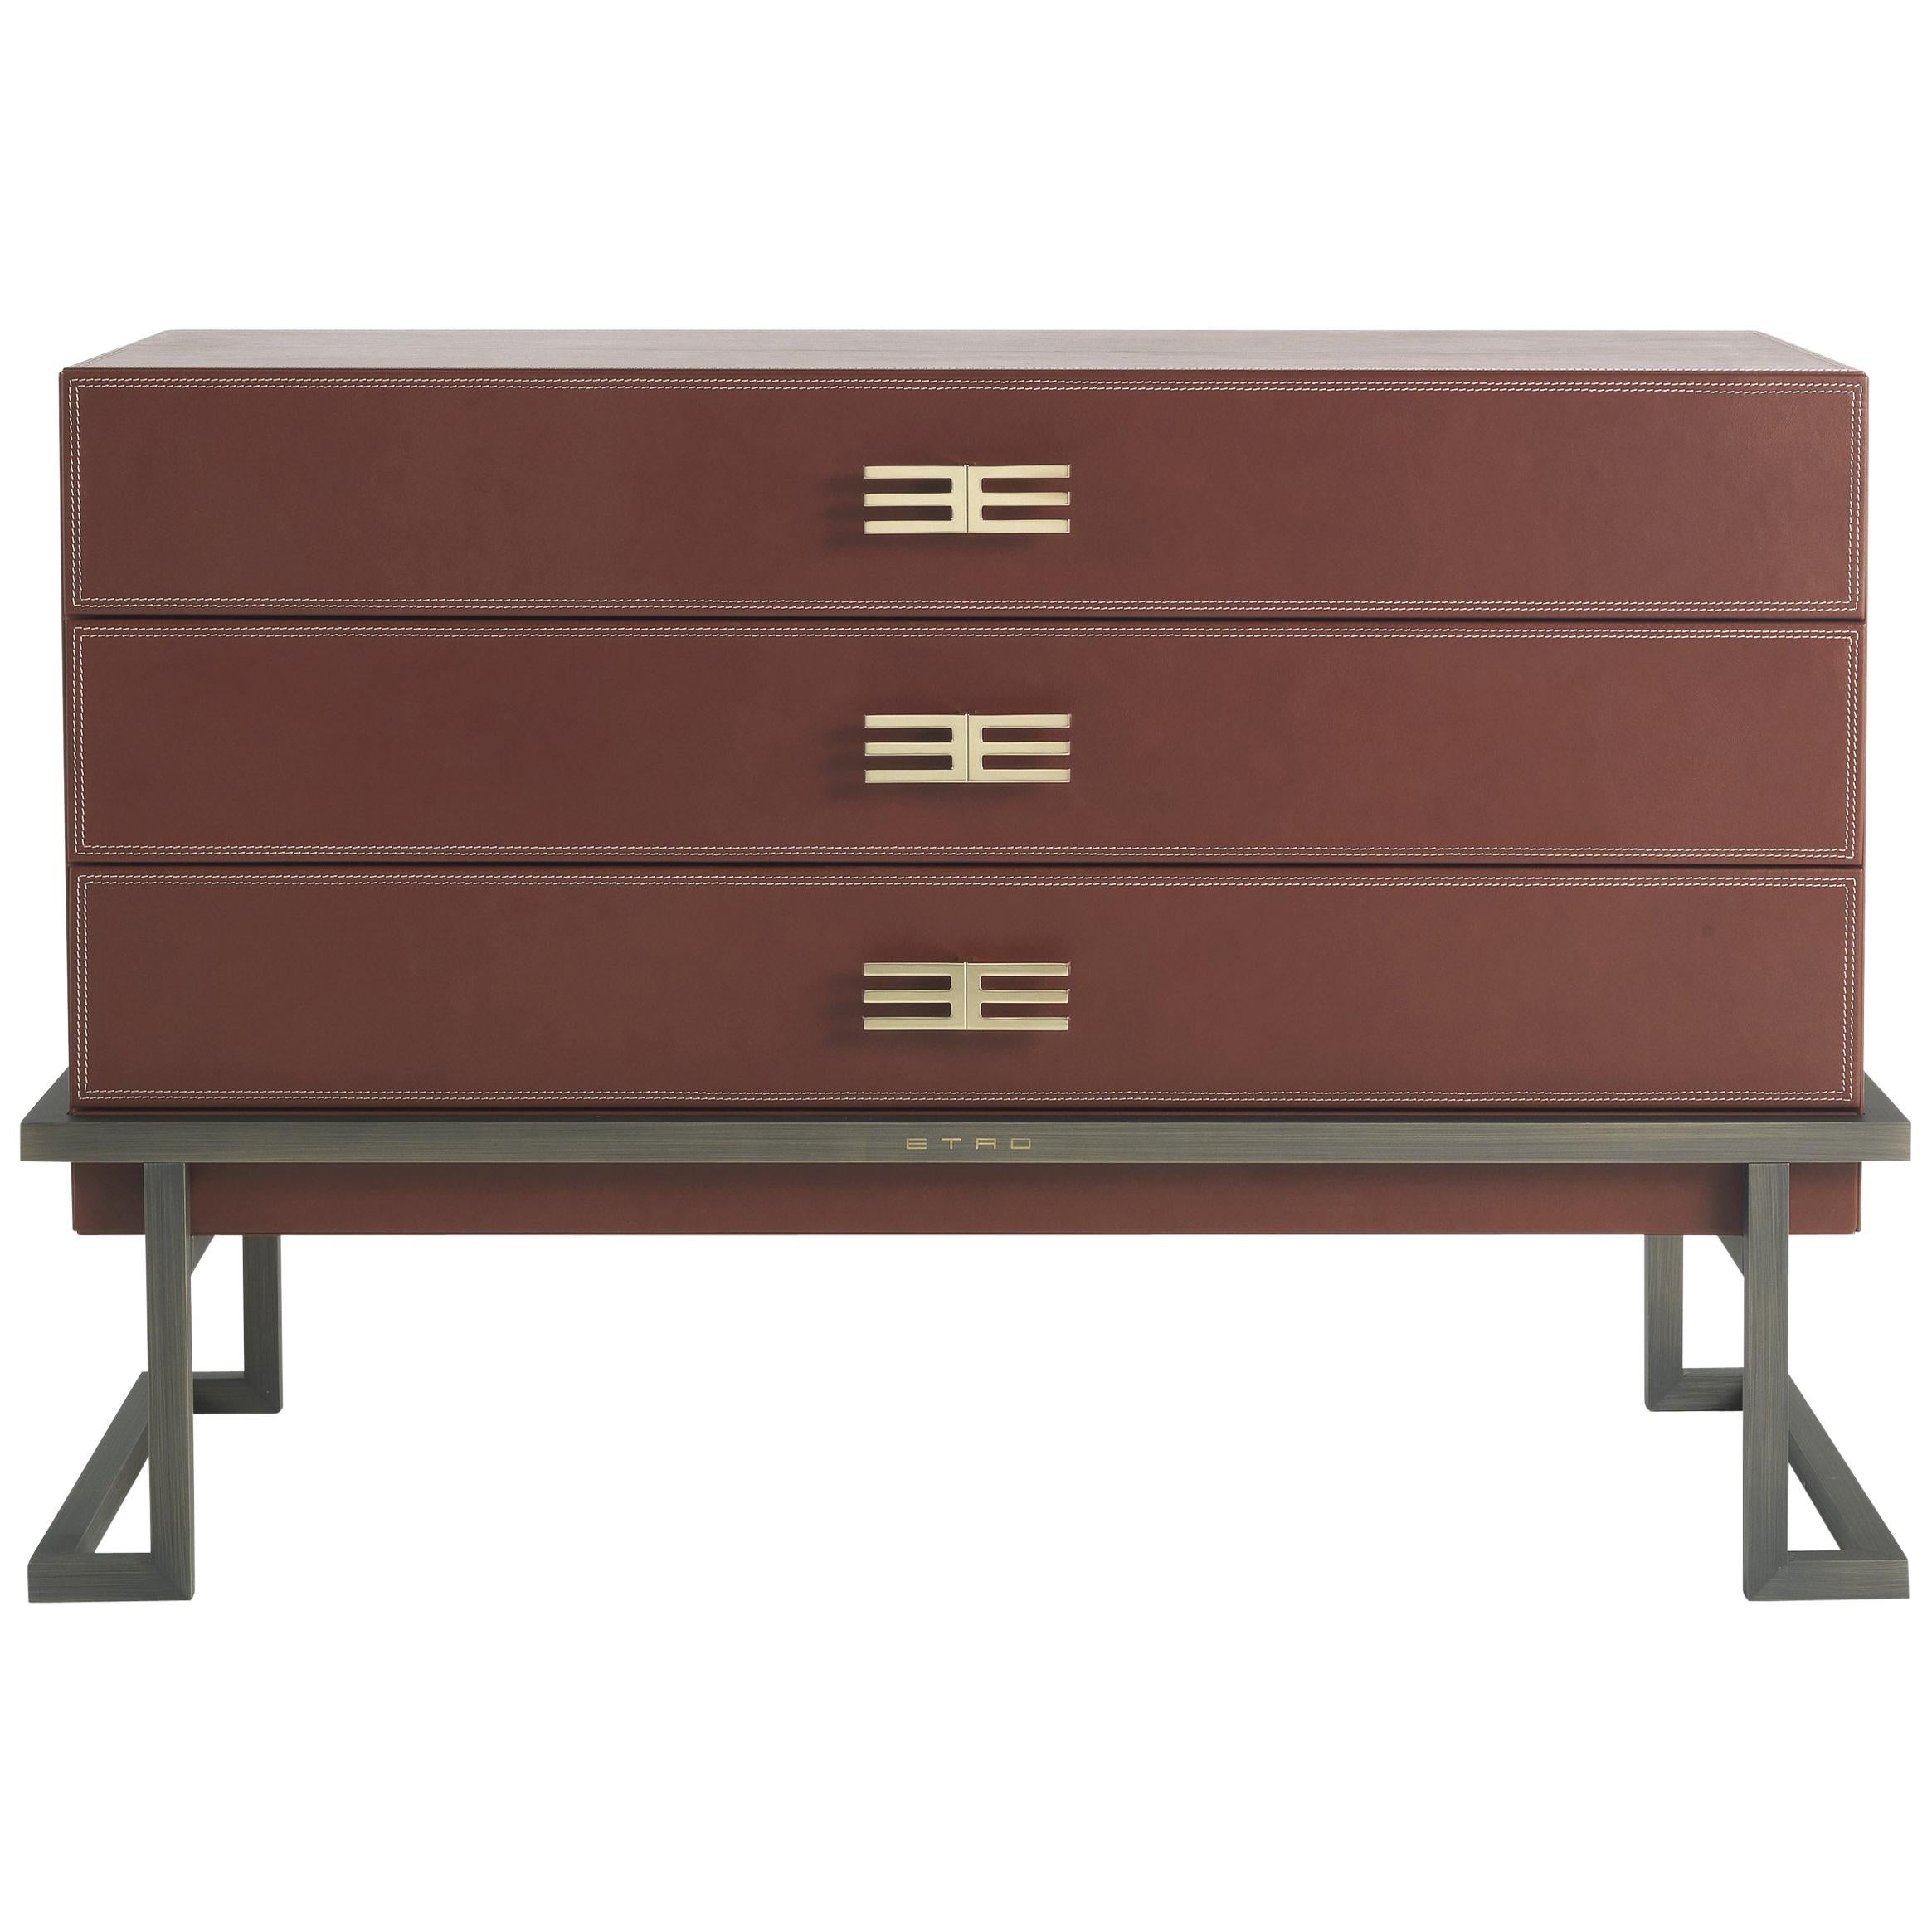 21st Century Kolkata Chest of Drawers in Leather by Etro Home Interiors